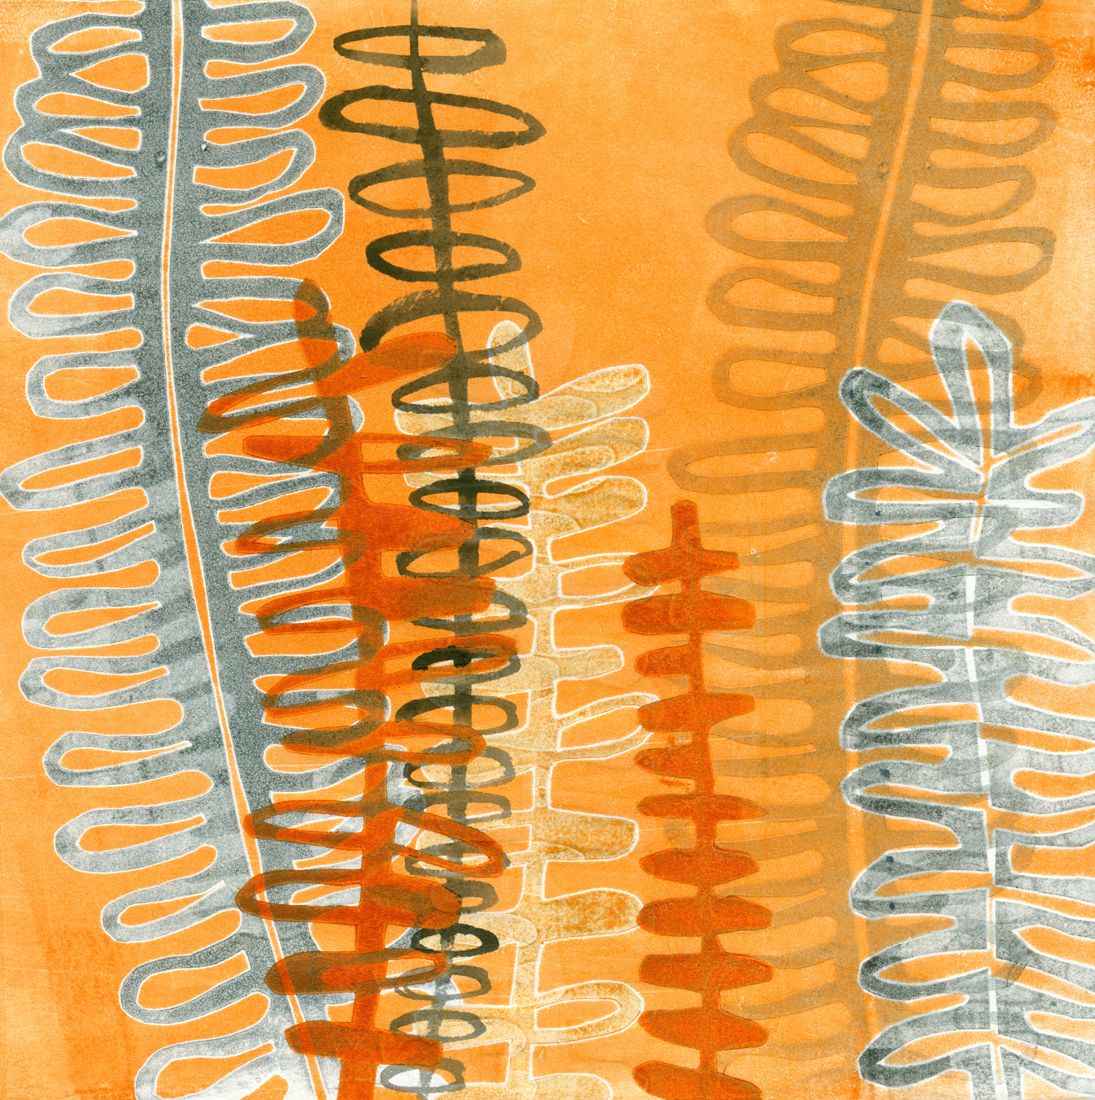 10" x 10" mixed media botanical piece with a fern pattern in indigo blue, orange and white, monoprint with India ink